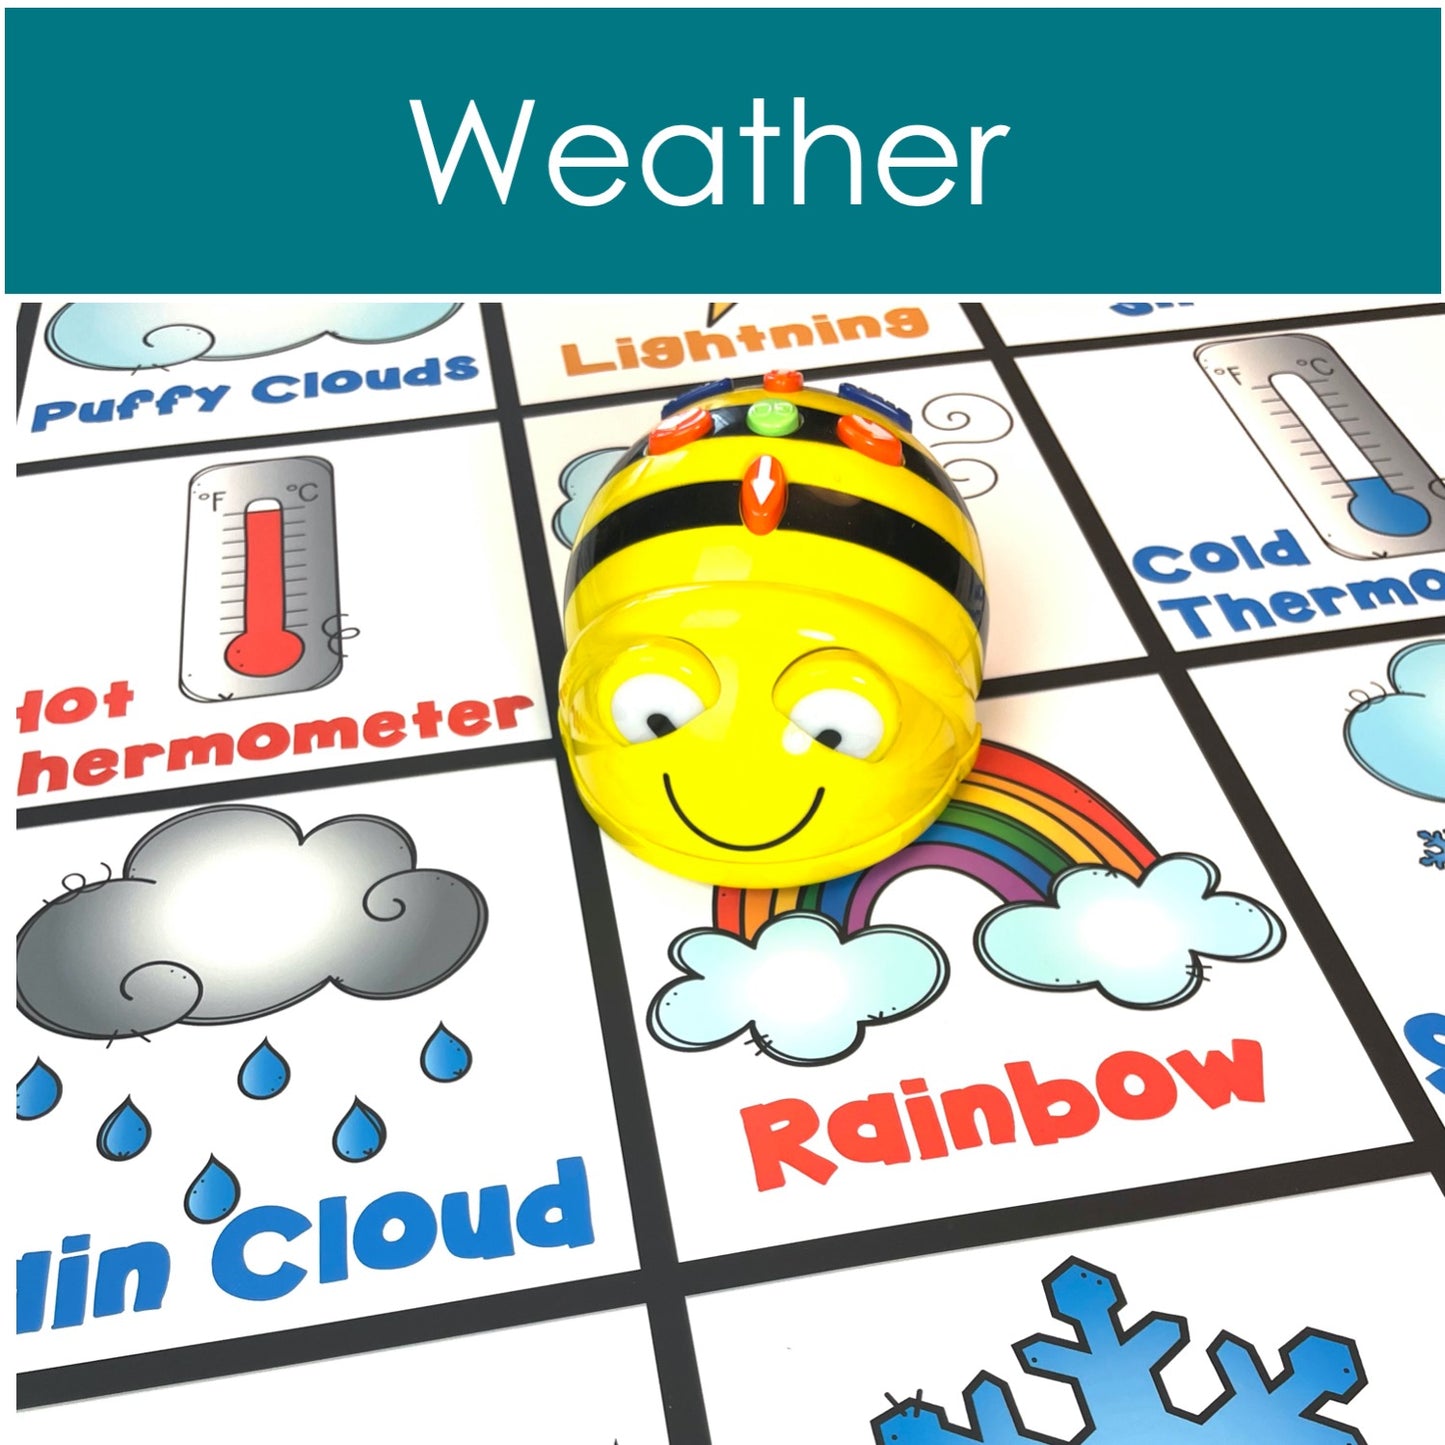 BeeBot weather mat